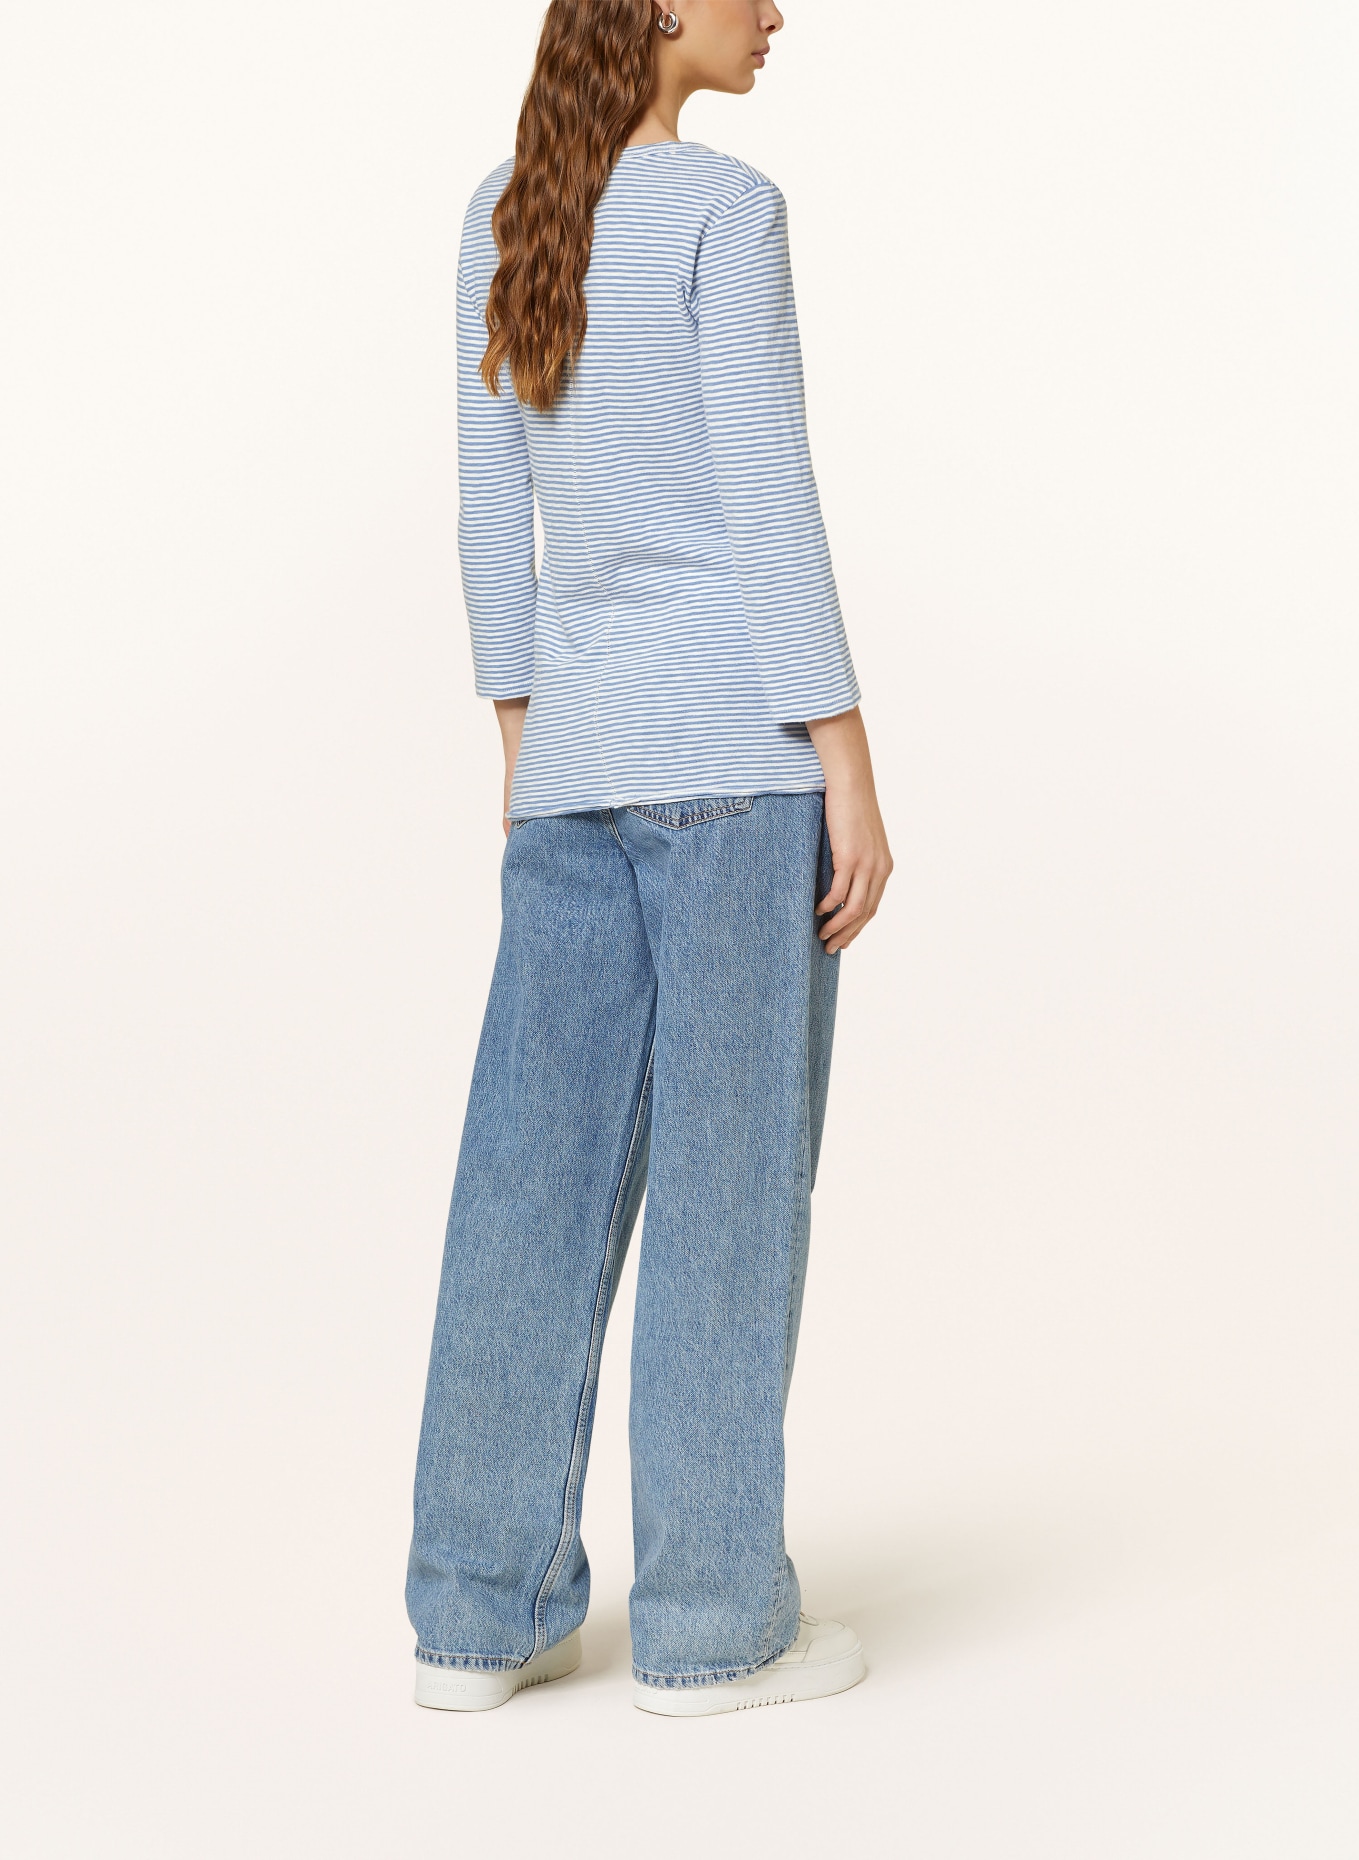 Marc O'Polo DENIM Shirt with 3/4 sleeves, Color: BLUE/ WHITE (Image 3)